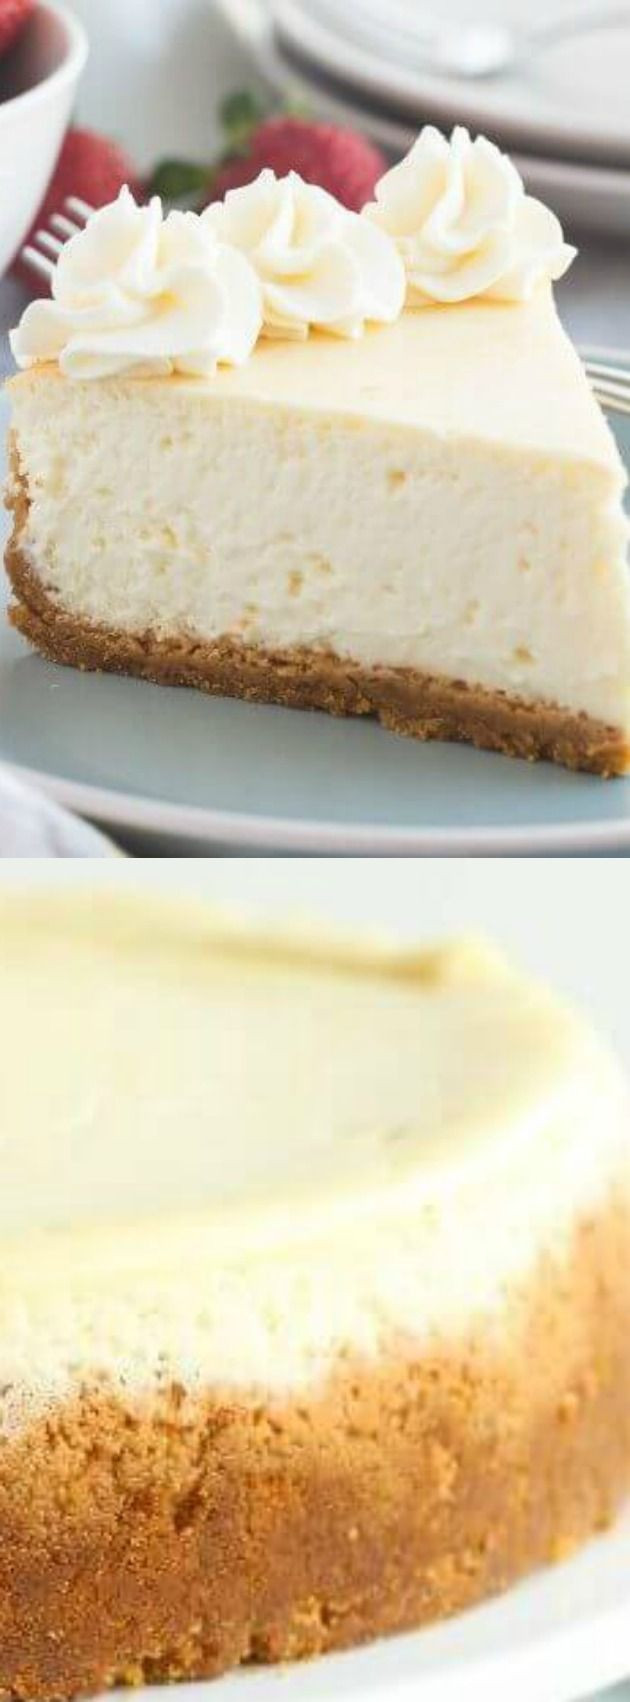 Cheesecake Recipe Without Sour Cream
 plain cheesecake recipe without sour cream